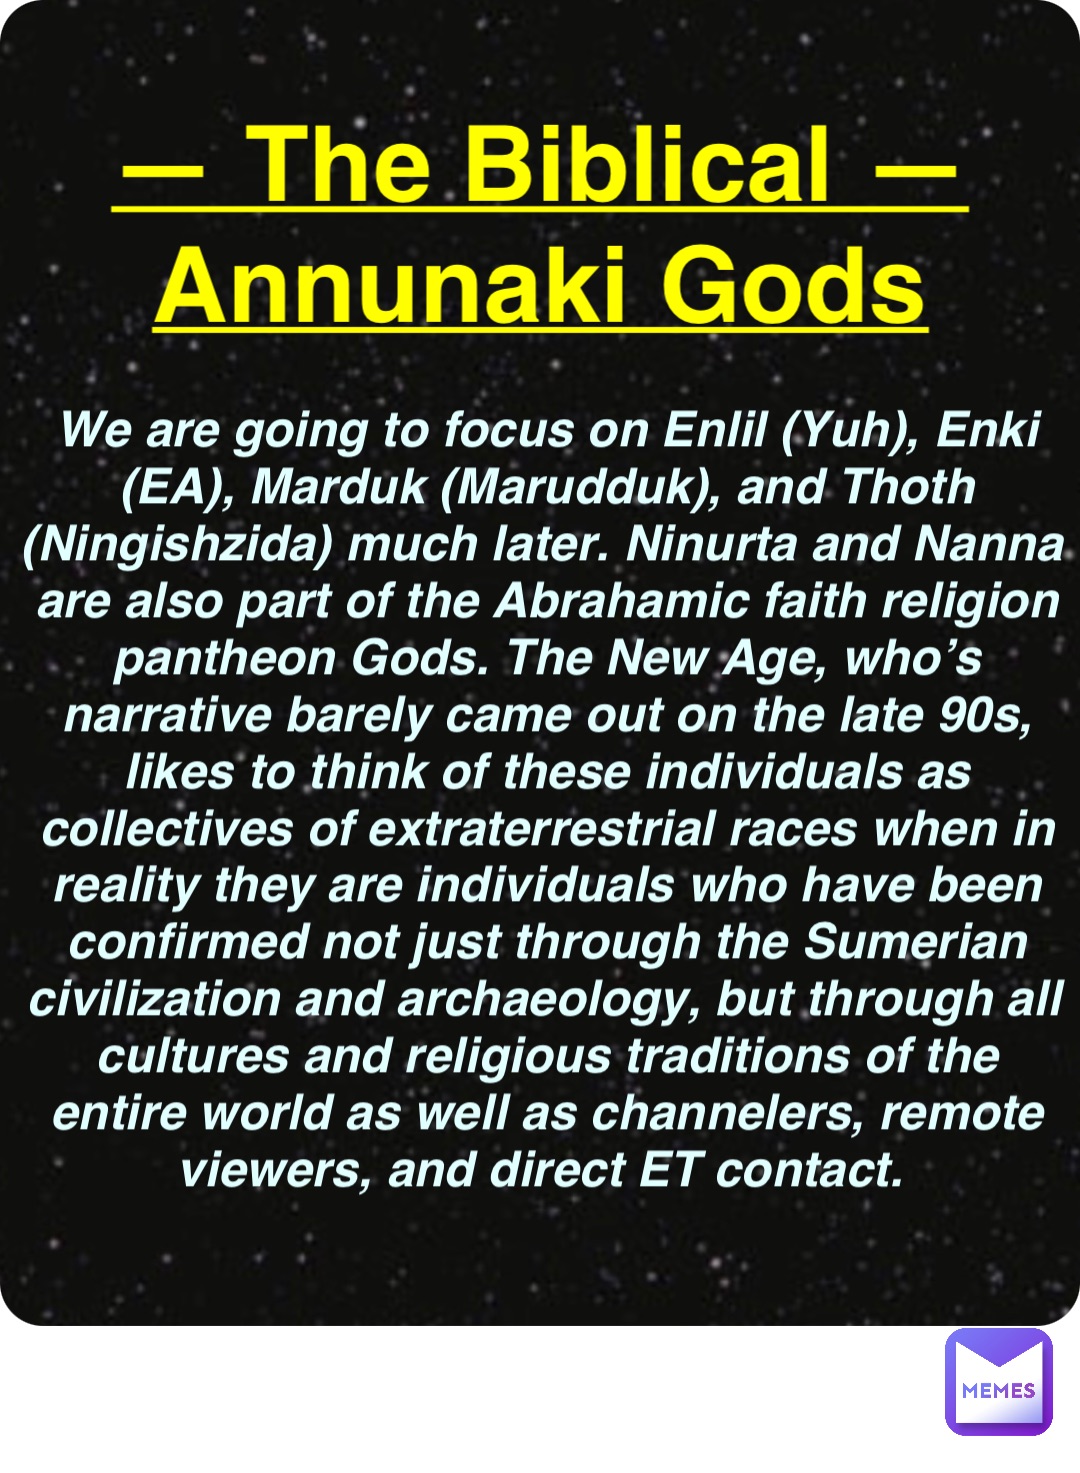 Double tap to edit — The Biblical —
Annunaki Gods We are going to focus on Enlil (Yuh), Enki (EA), Marduk (Marudduk), and Thoth (Ningishzida) much later. Ninurta and Nanna are also part of the Abrahamic faith religion pantheon Gods. The New Age, who’s narrative barely came out on the late 90s, likes to think of these individuals as collectives of extraterrestrial races when in reality they are individuals who have been confirmed not just through the Sumerian civilization and archaeology, but through all cultures and religious traditions of the entire world as well as channelers, remote viewers, and direct ET contact.